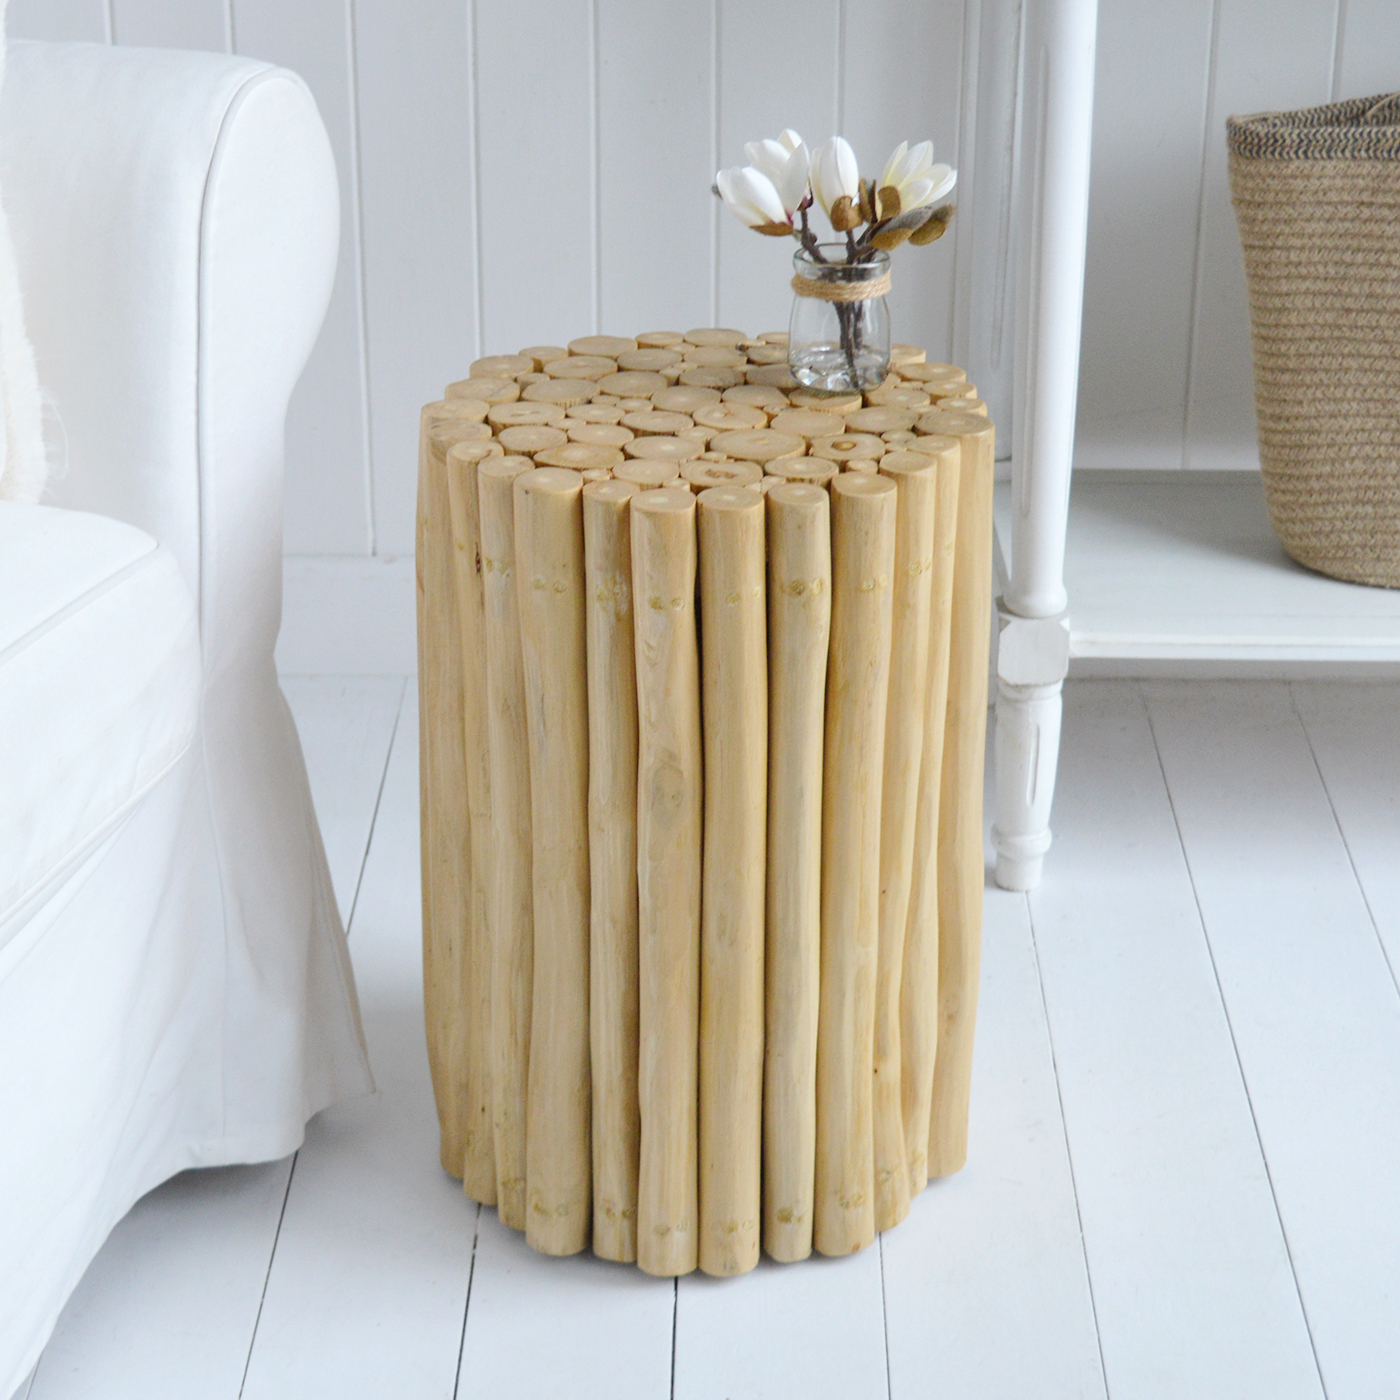 Harrington Teak Wood Stool / Table  - New England Farmhouse and Coastal Furniture from The White Lighthouse. Living Room, Bedroom and Hallway Furniture for beautiful homes